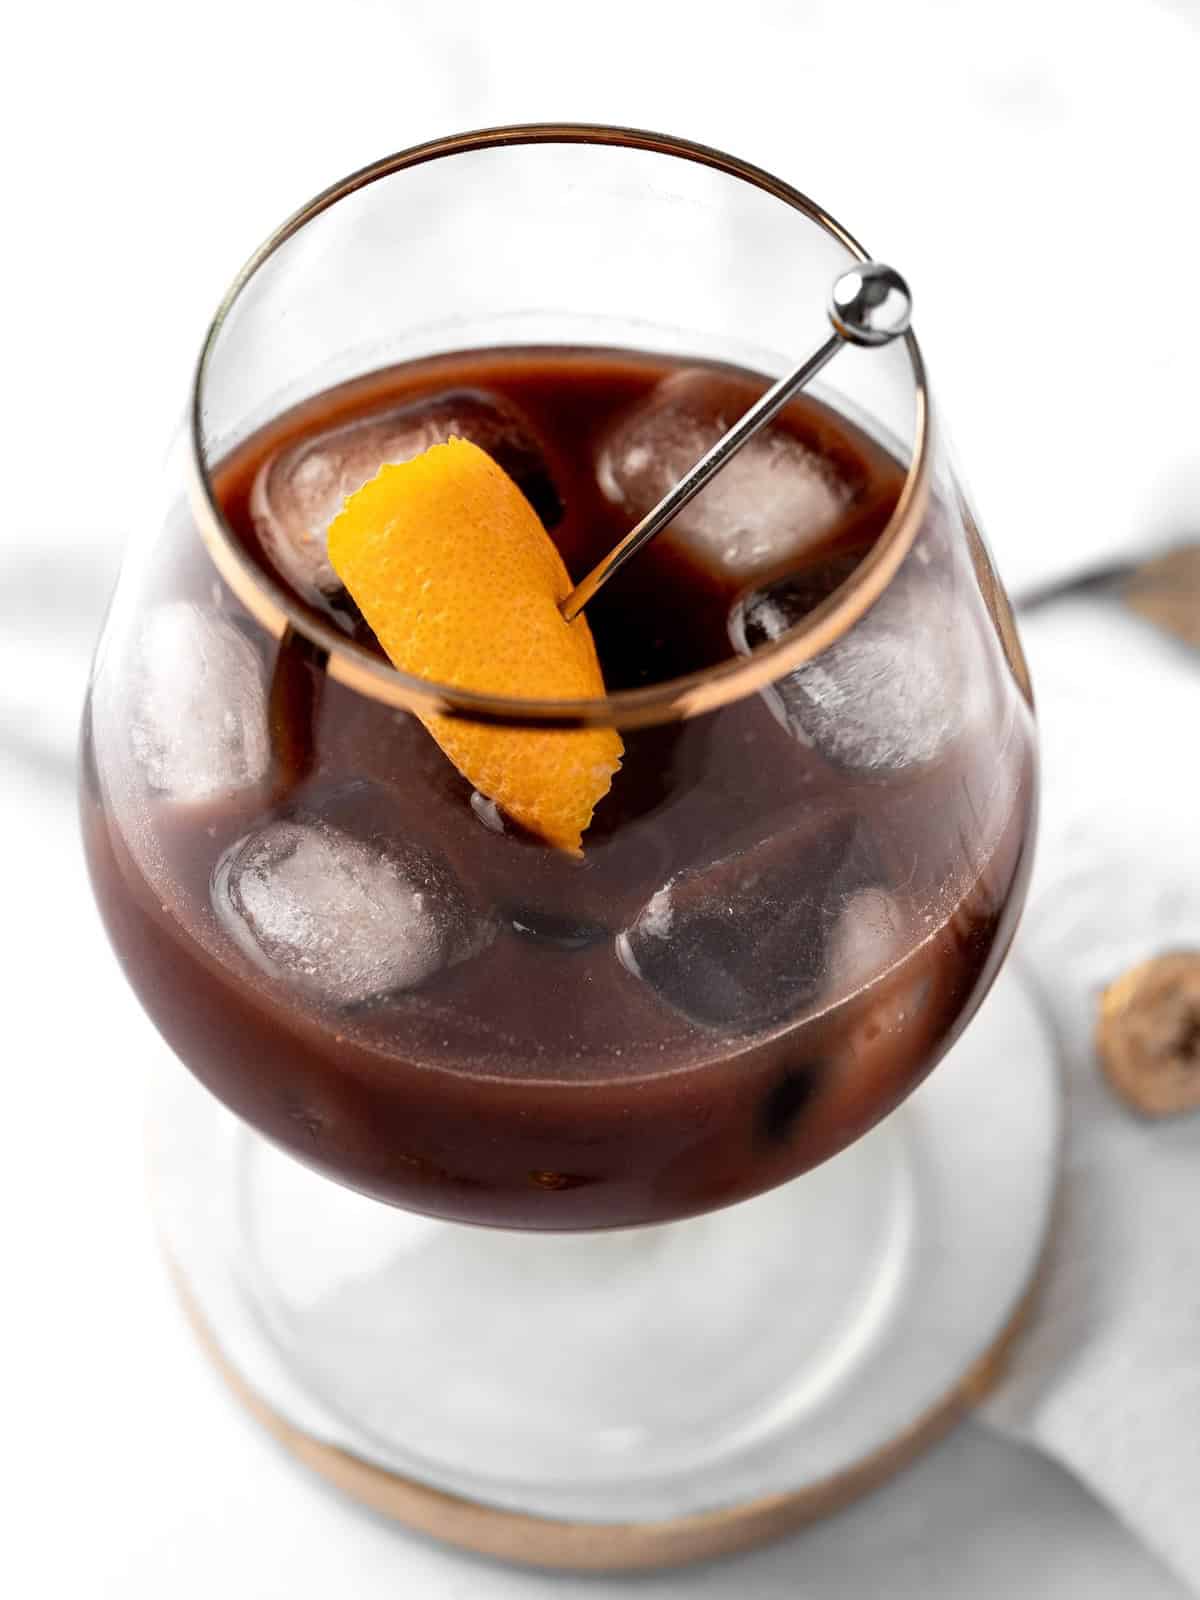 An Old fashioned chocolate cocktail.